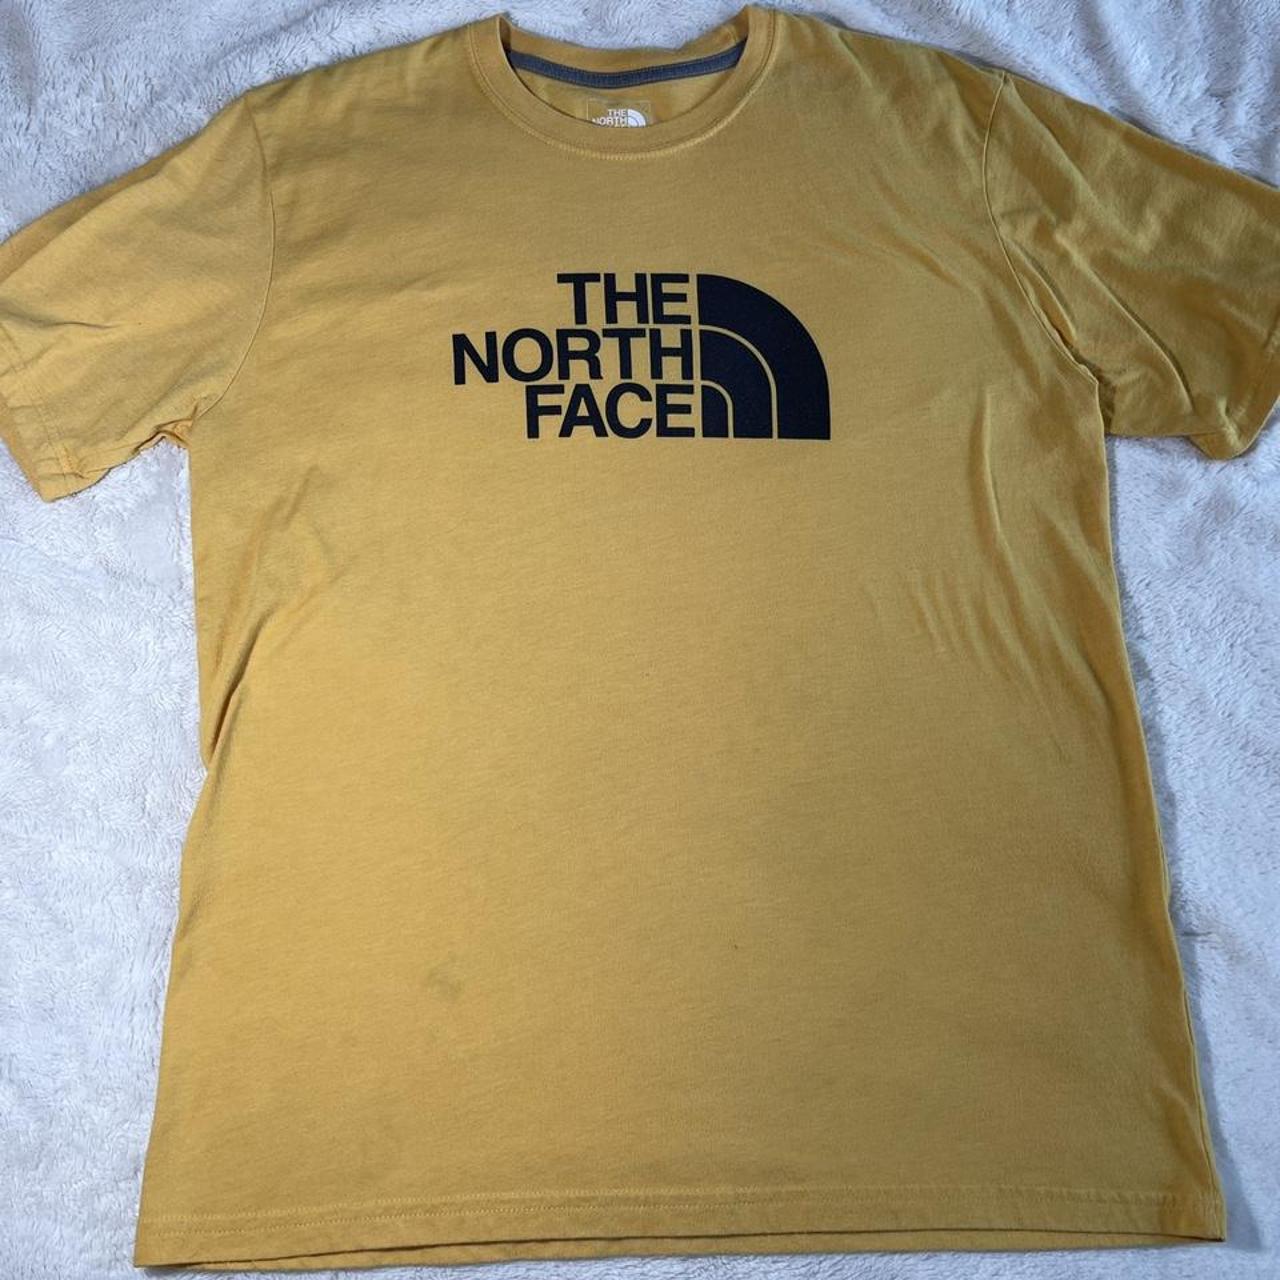 The north face t shirt. Very nice yellow color and... - Depop